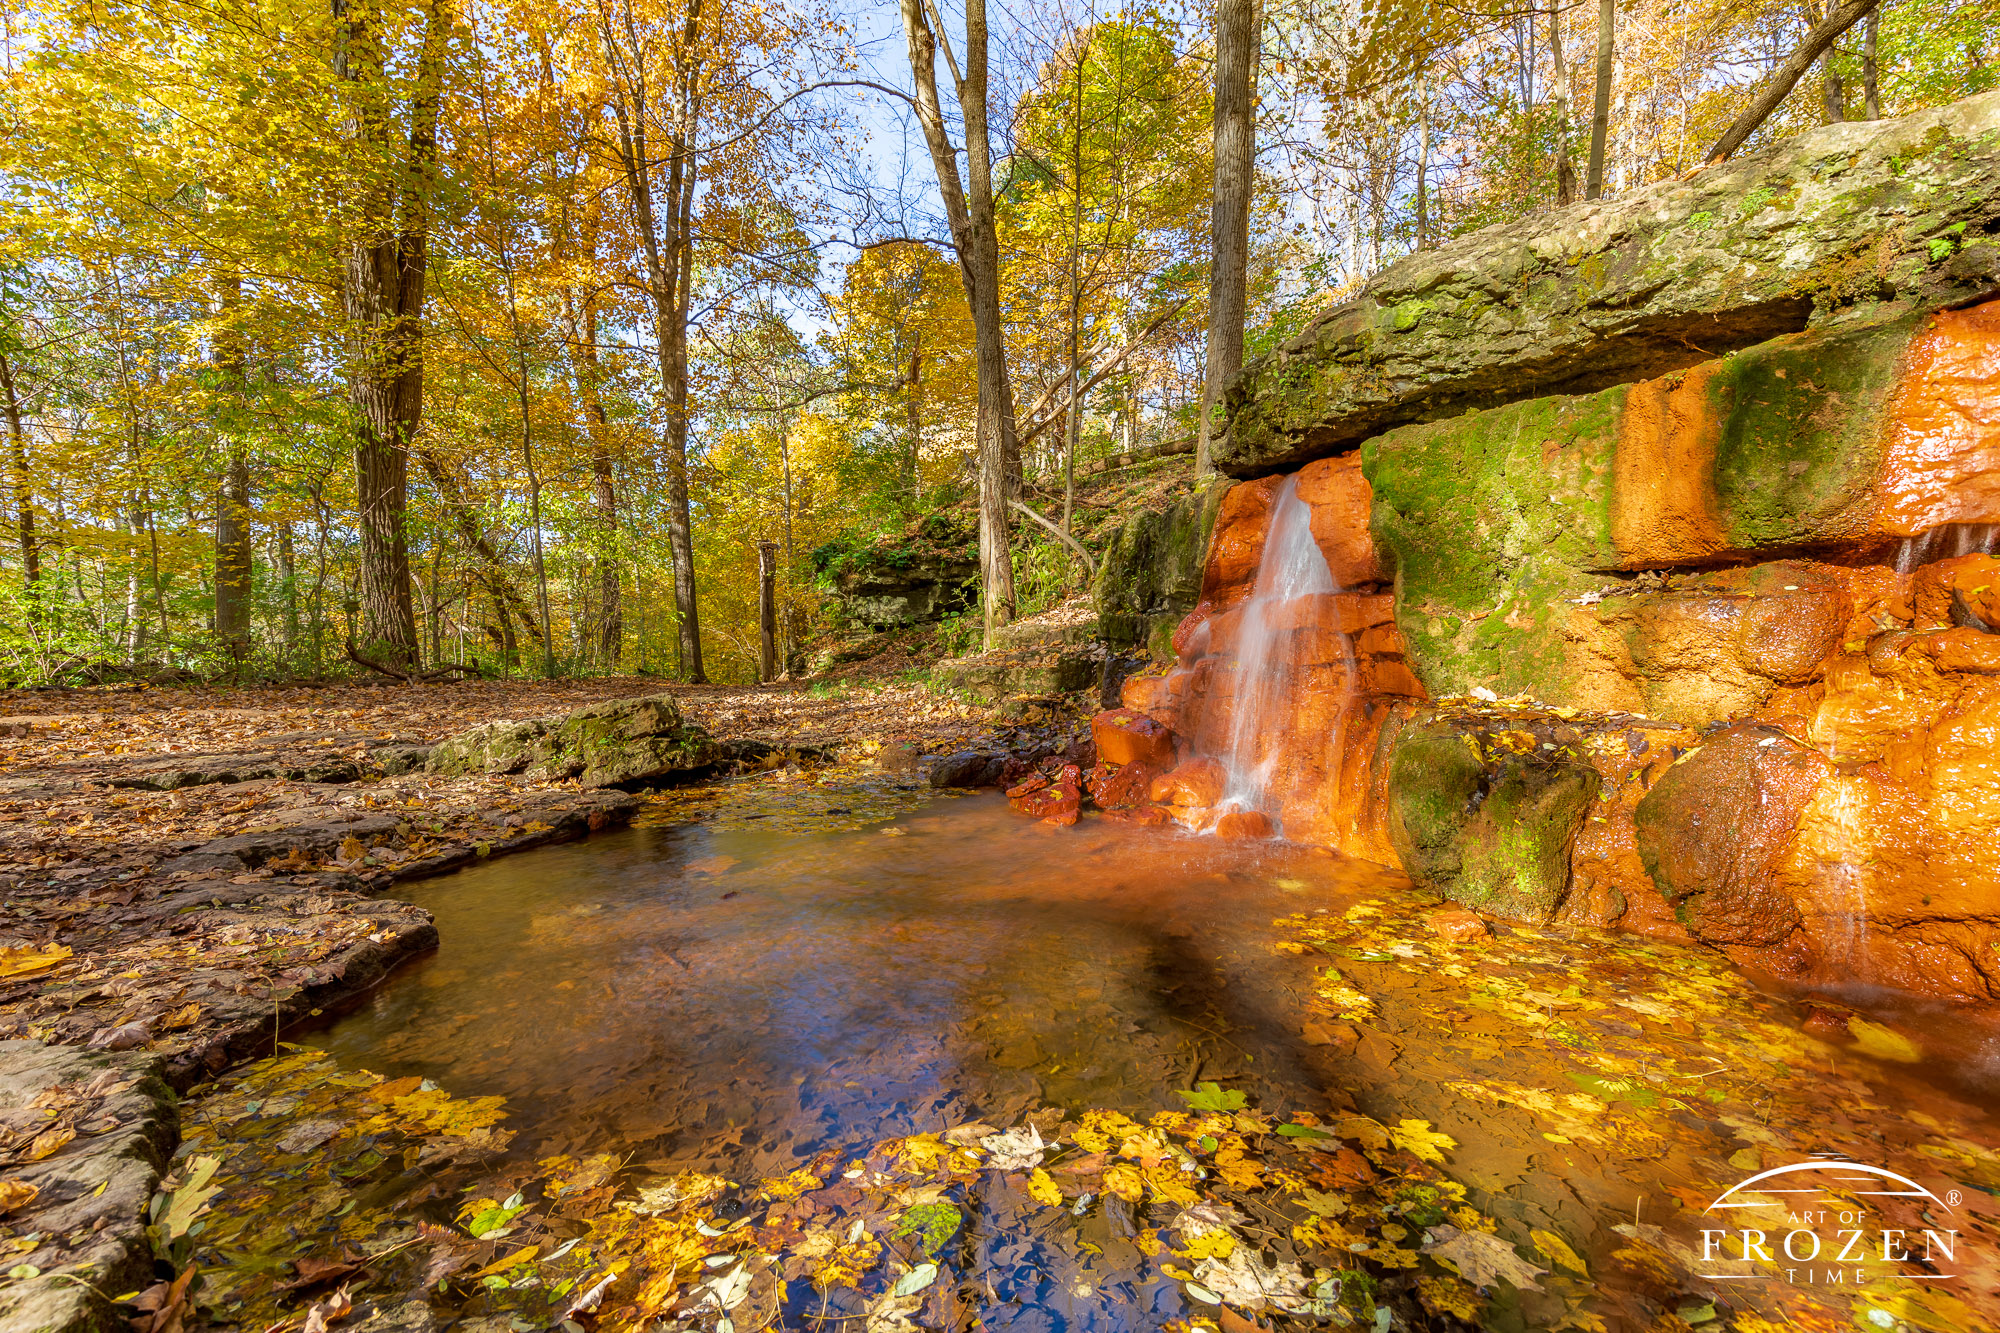 A side view of The Yellow Springs in Glen Helen Nature Preserve as the sugar maple leaves are filling the waterfall pool